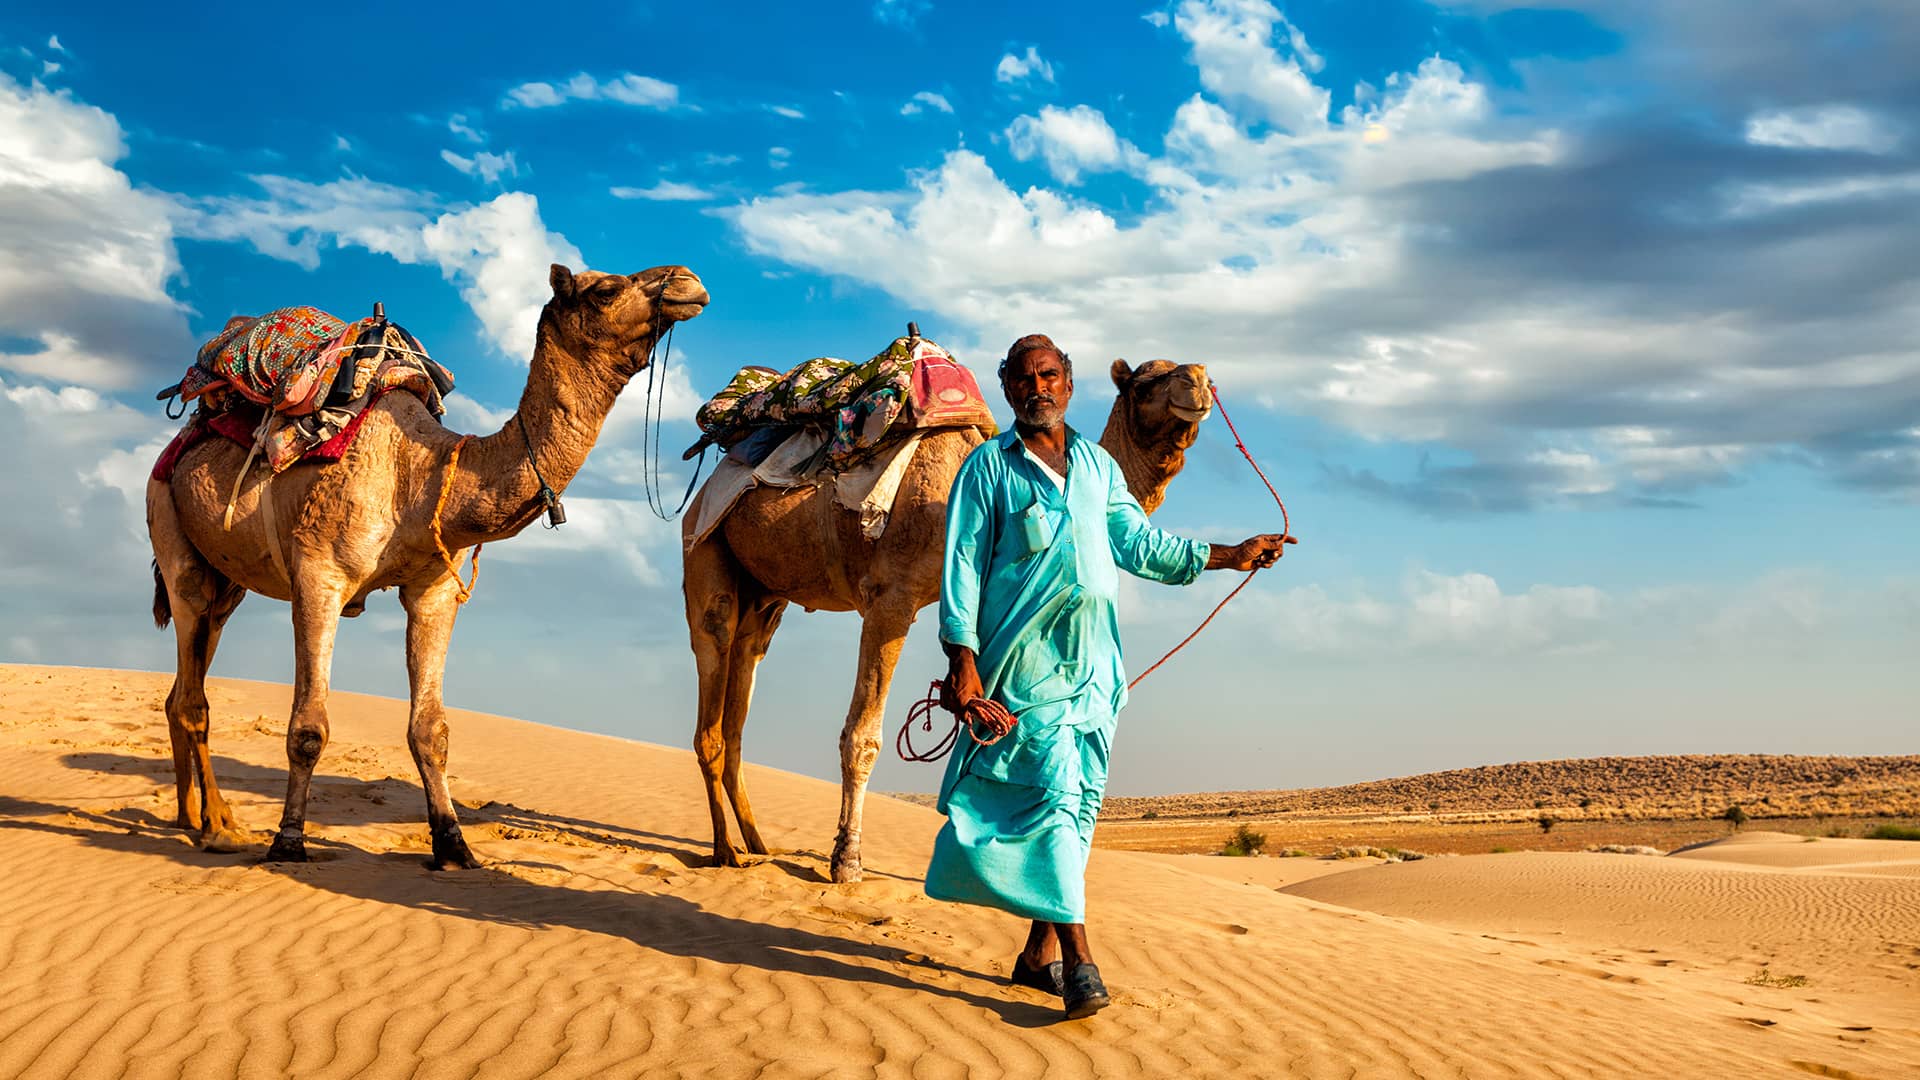 Rajasthan records 18cr domestic tourists in 2023: Govt